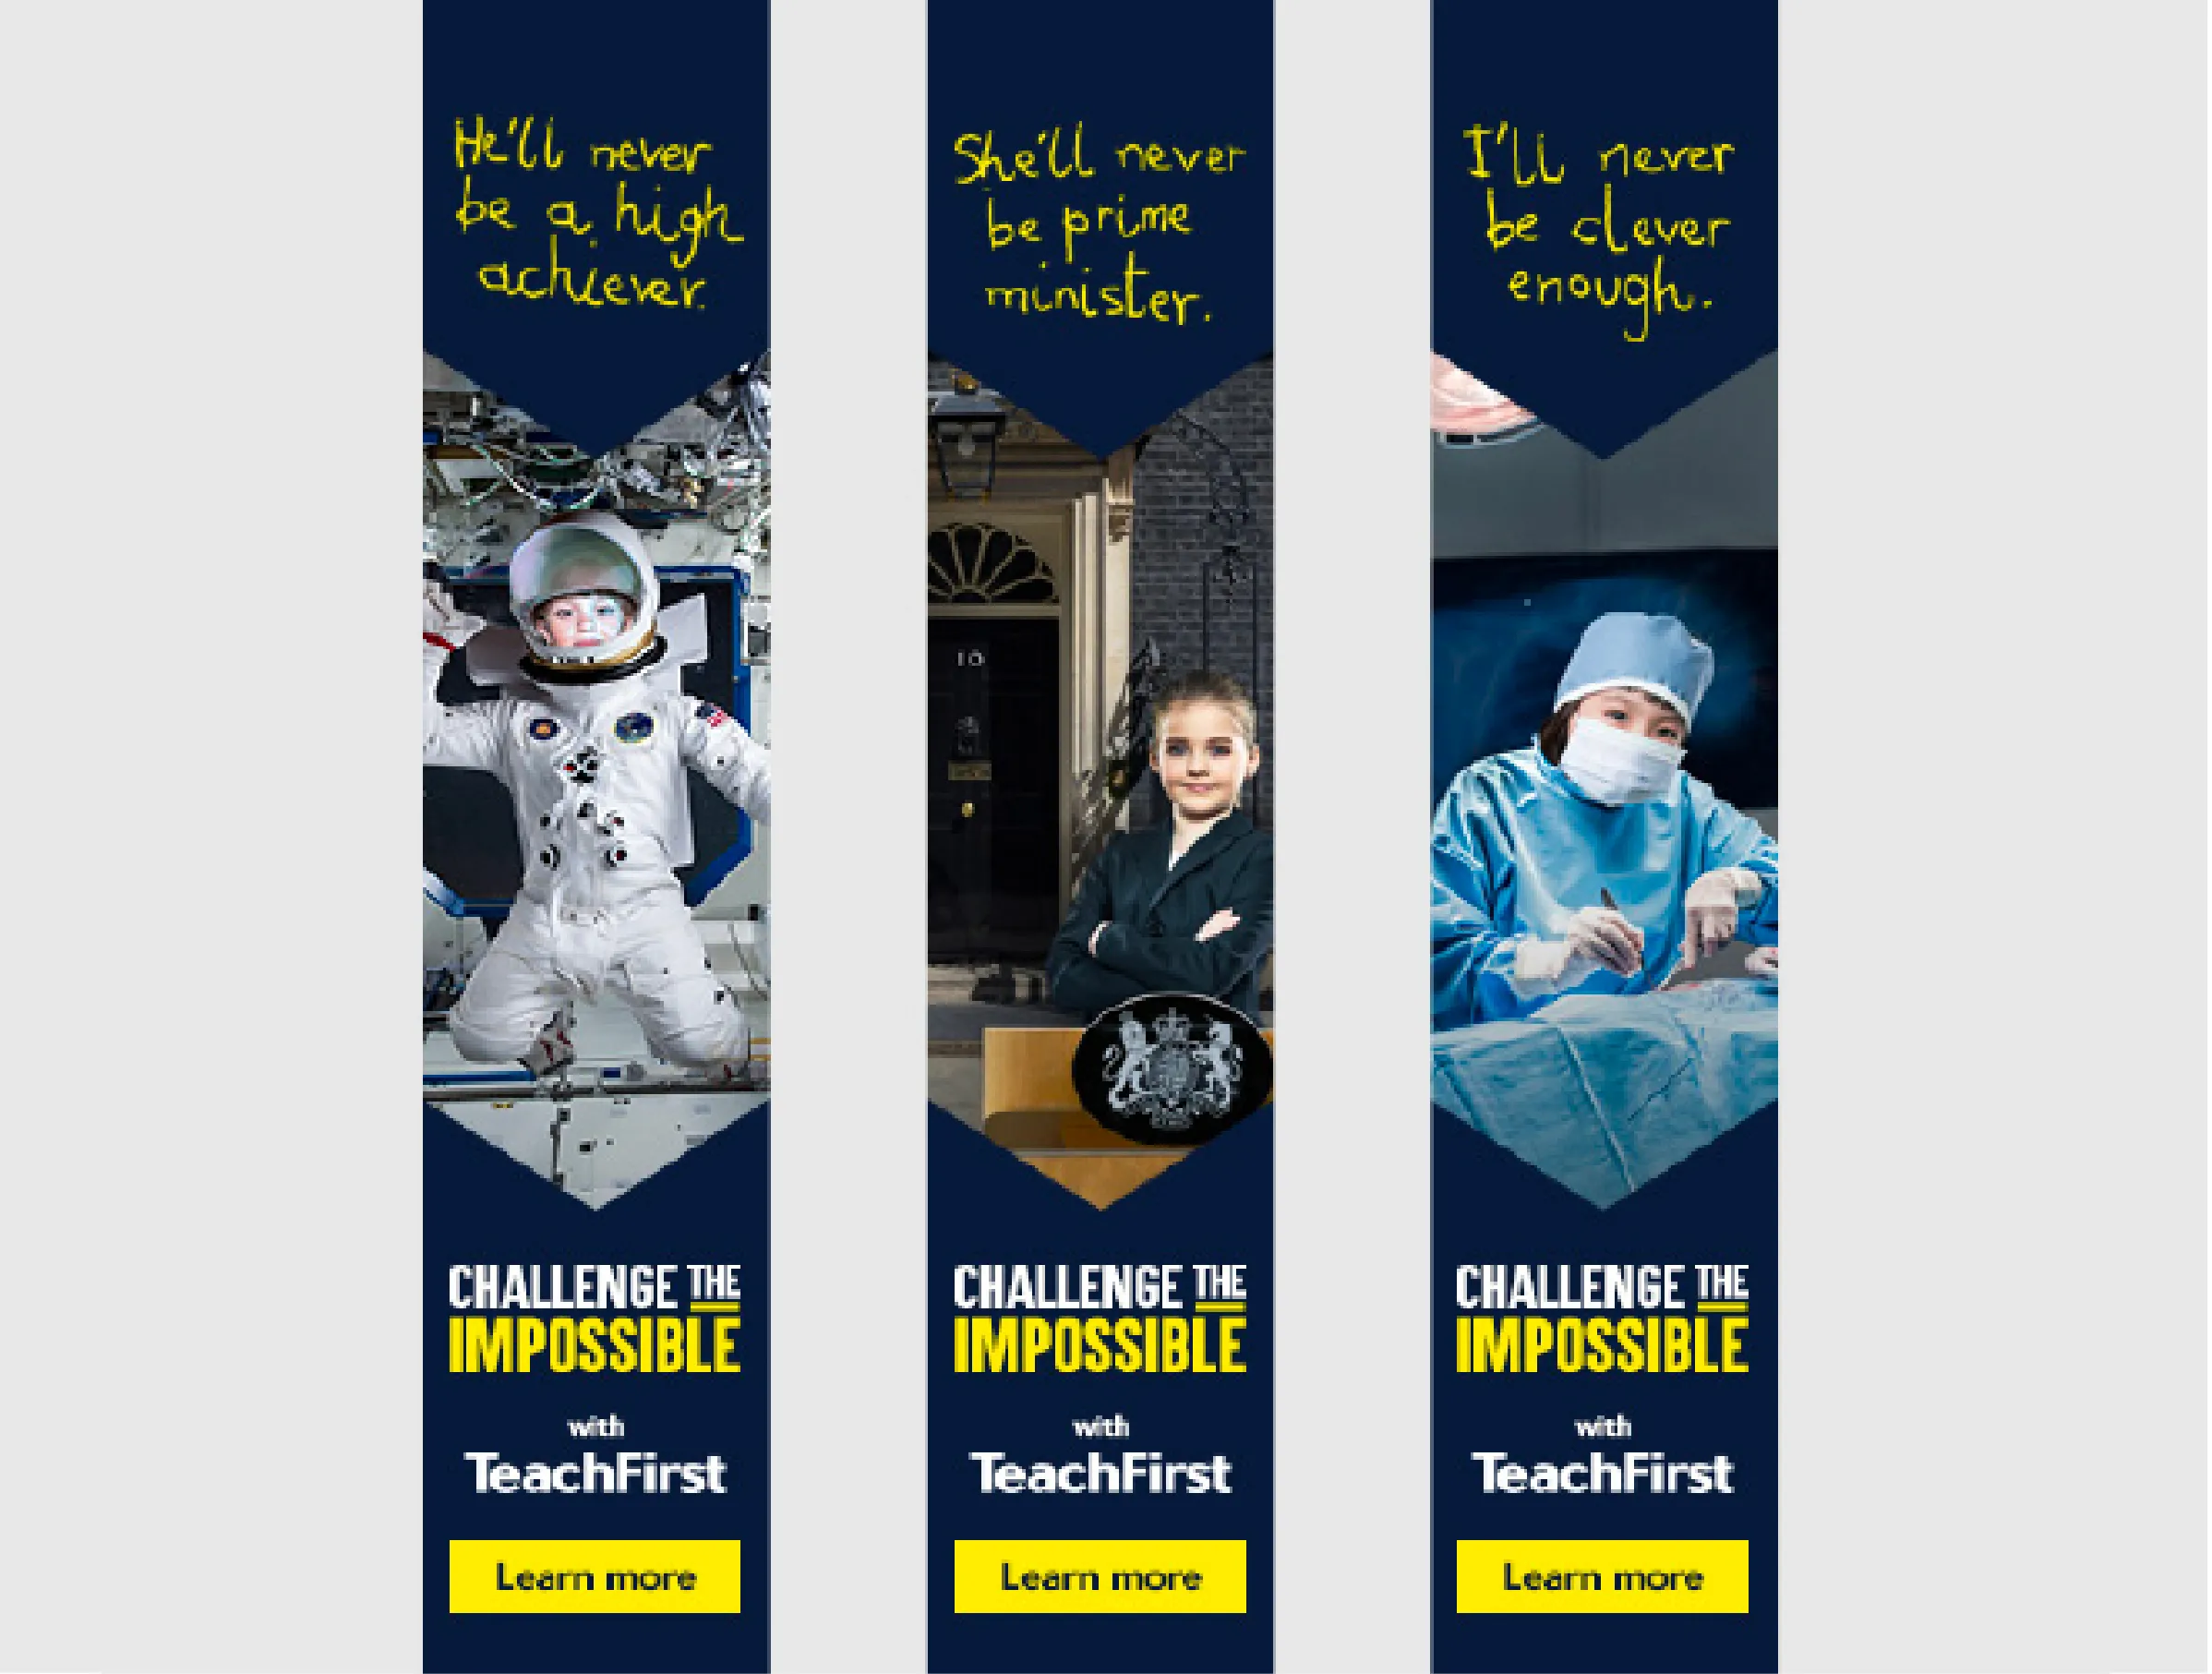 Digital skyscraper ads for Teach First "Challenge the Impossible" campaign 